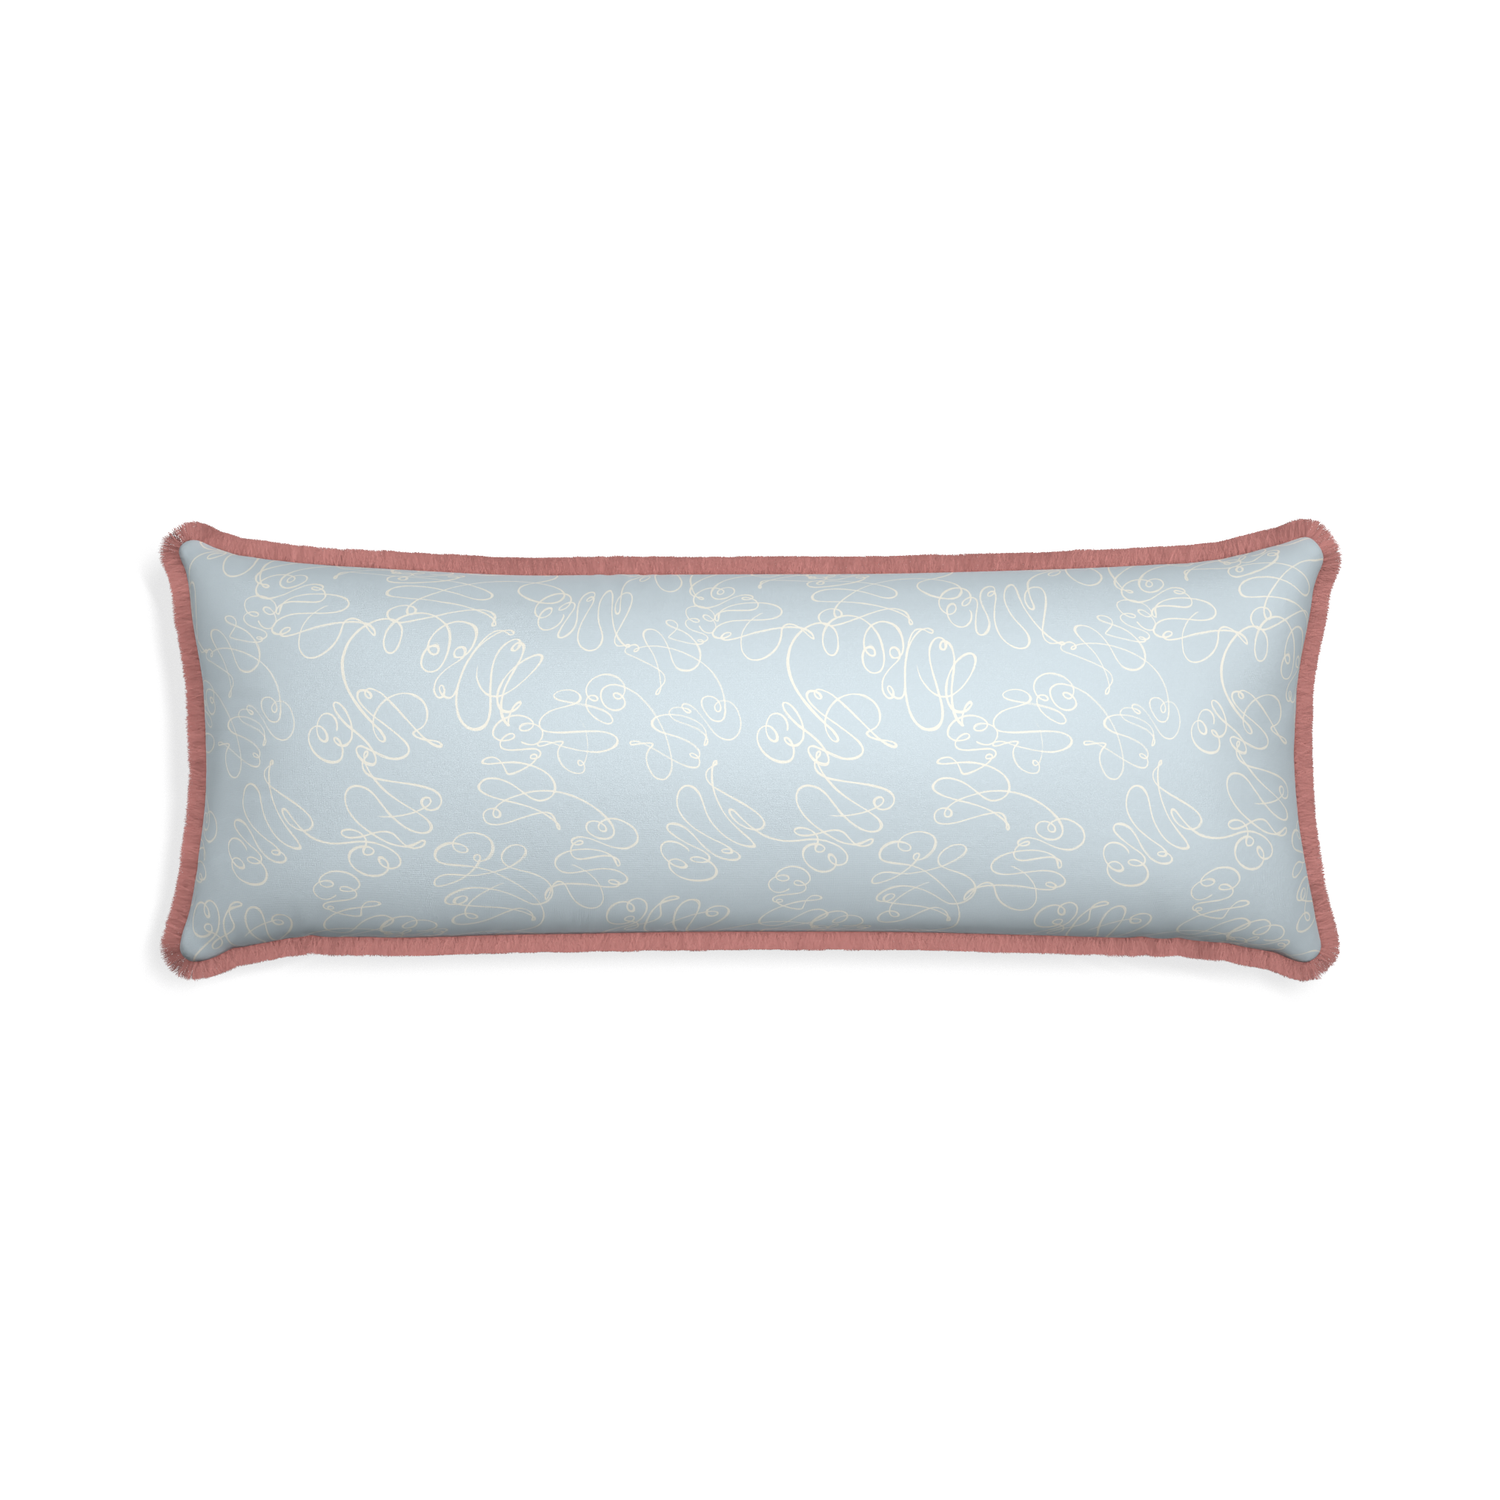 Xl-lumbar mirabella custom pillow with d fringe on white background